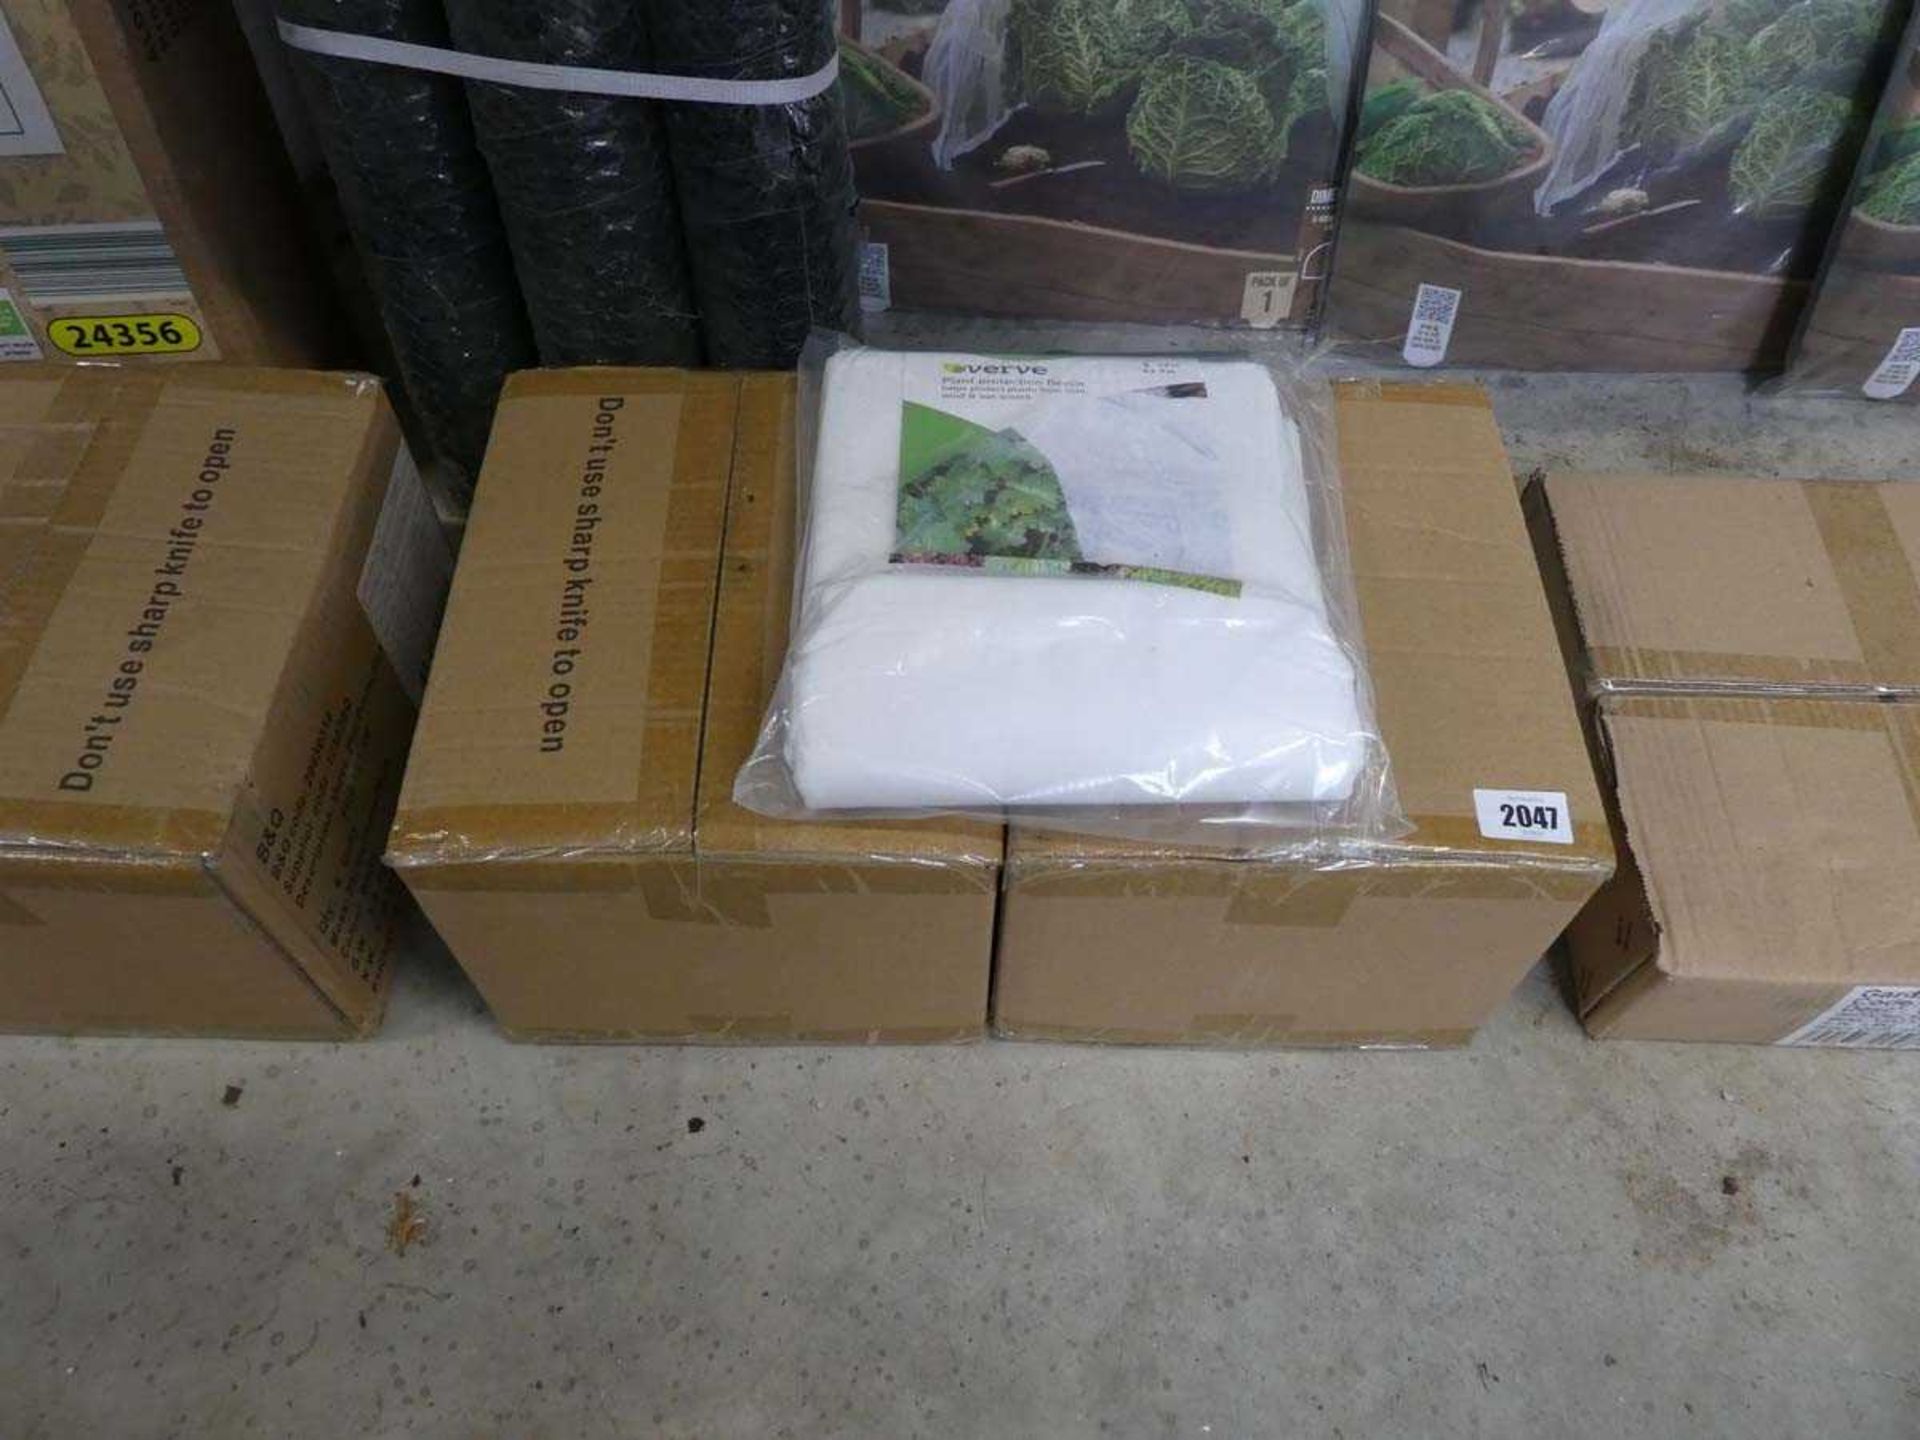 2 boxes containing 12 Verve plant protection fleeces